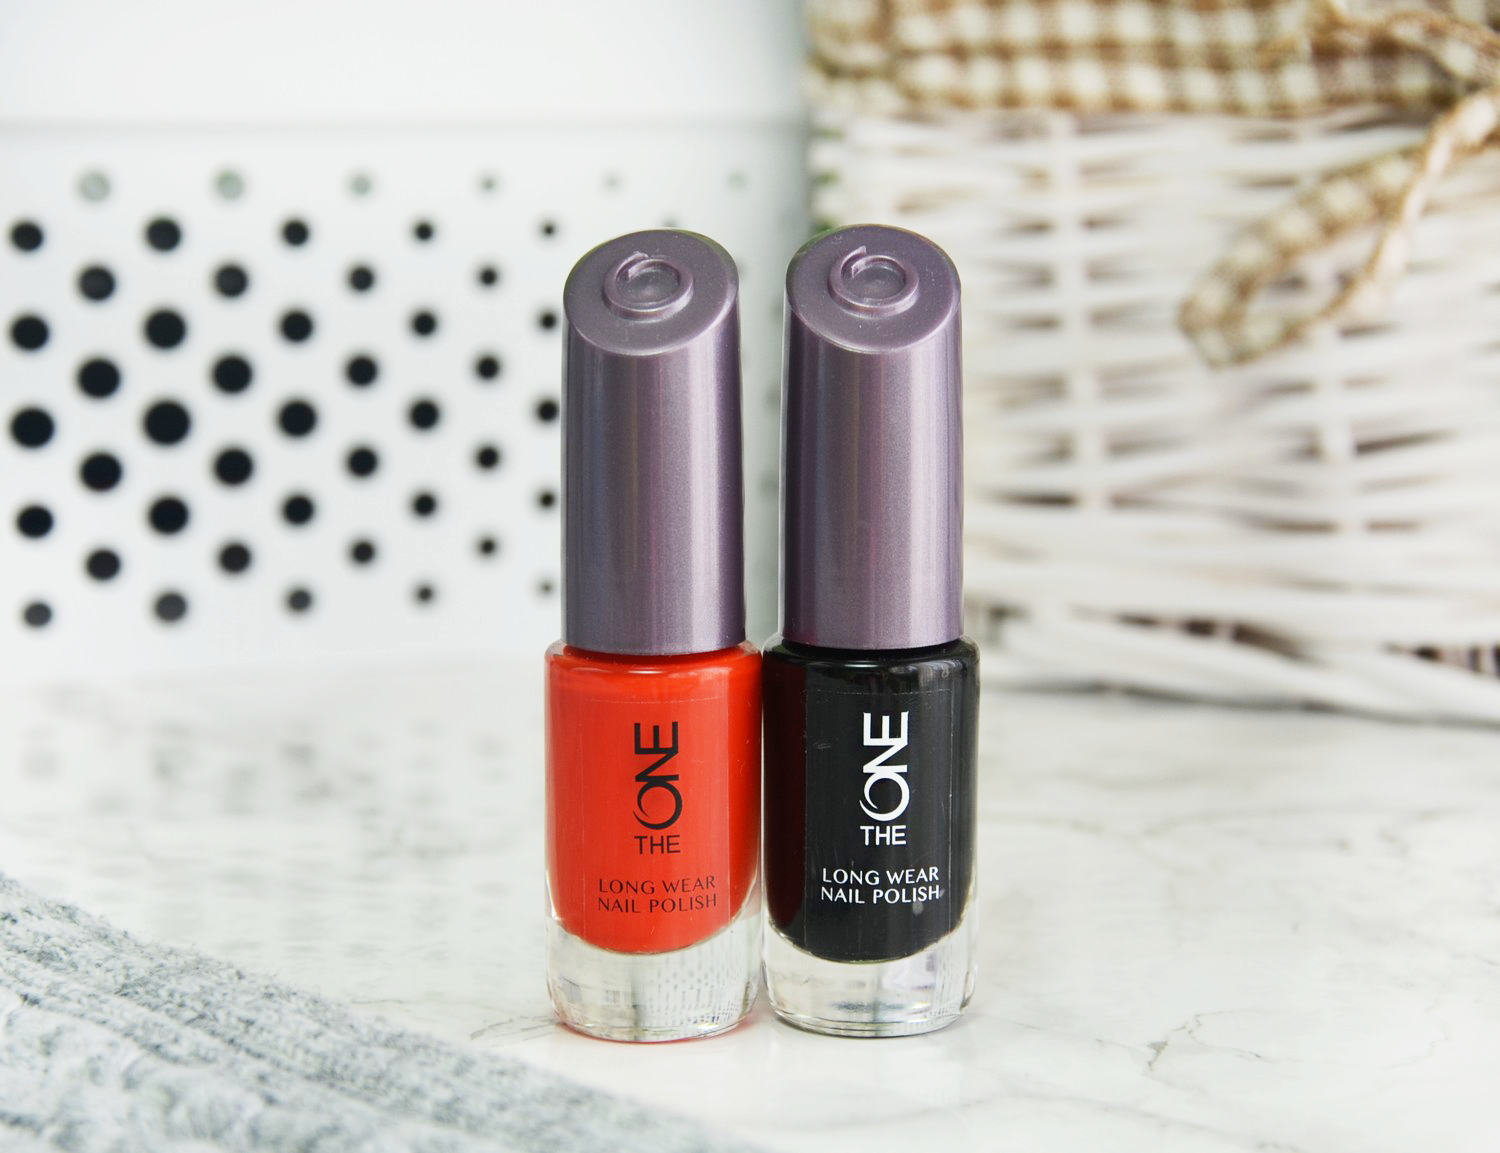 Oriflame The One Long Wear Nail Polish In Orange Spectre And Black Trick Lana Talks